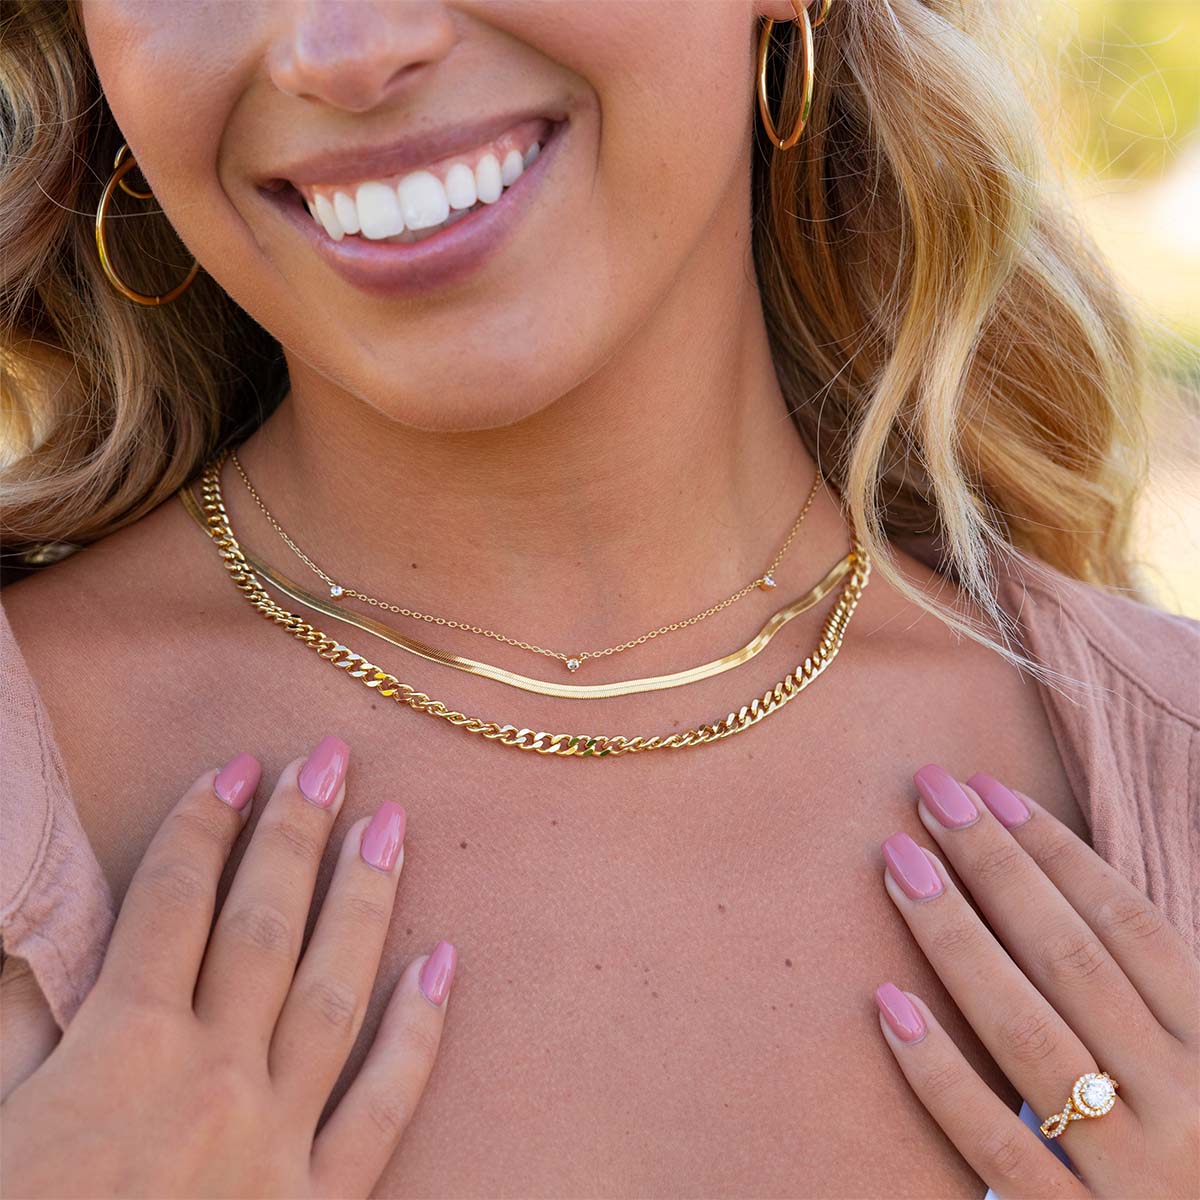  Layered Gold Necklaces for Women, 14K Gold Plated Herringbone  Necklace for Women Trendy Simple Dainty Snake Cuban Link Chain Choker  Necklace Gold Layered Necklaces for Women Girls Jewelry Gifts: Clothing,  Shoes